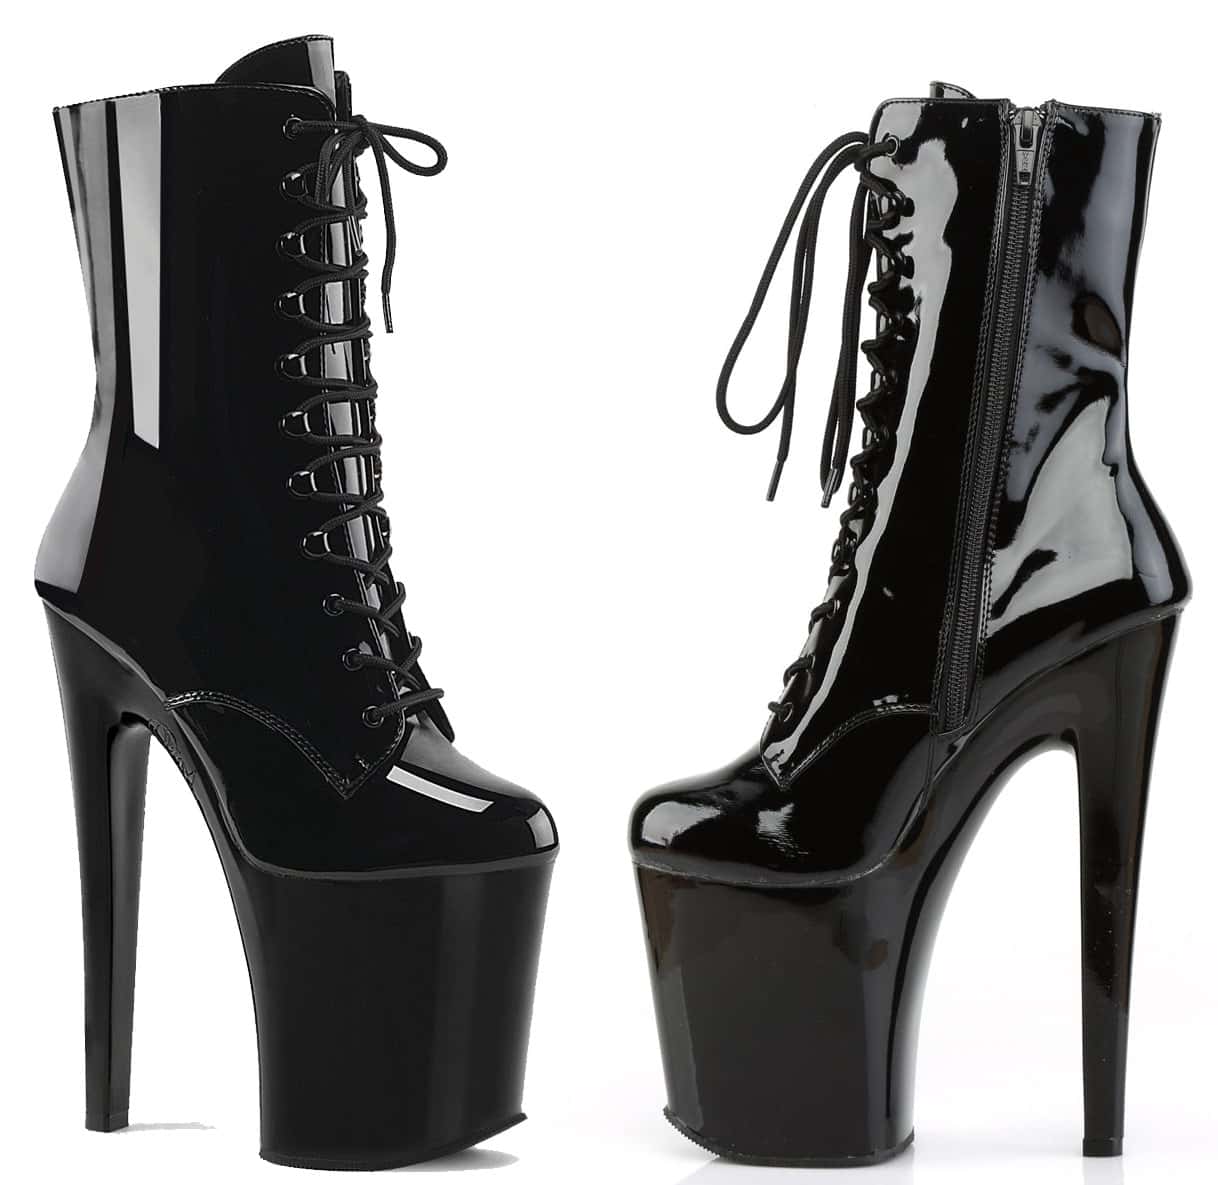 The Pleaser Xtreme 1020 has four-inch platforms and eight-inch towering heels